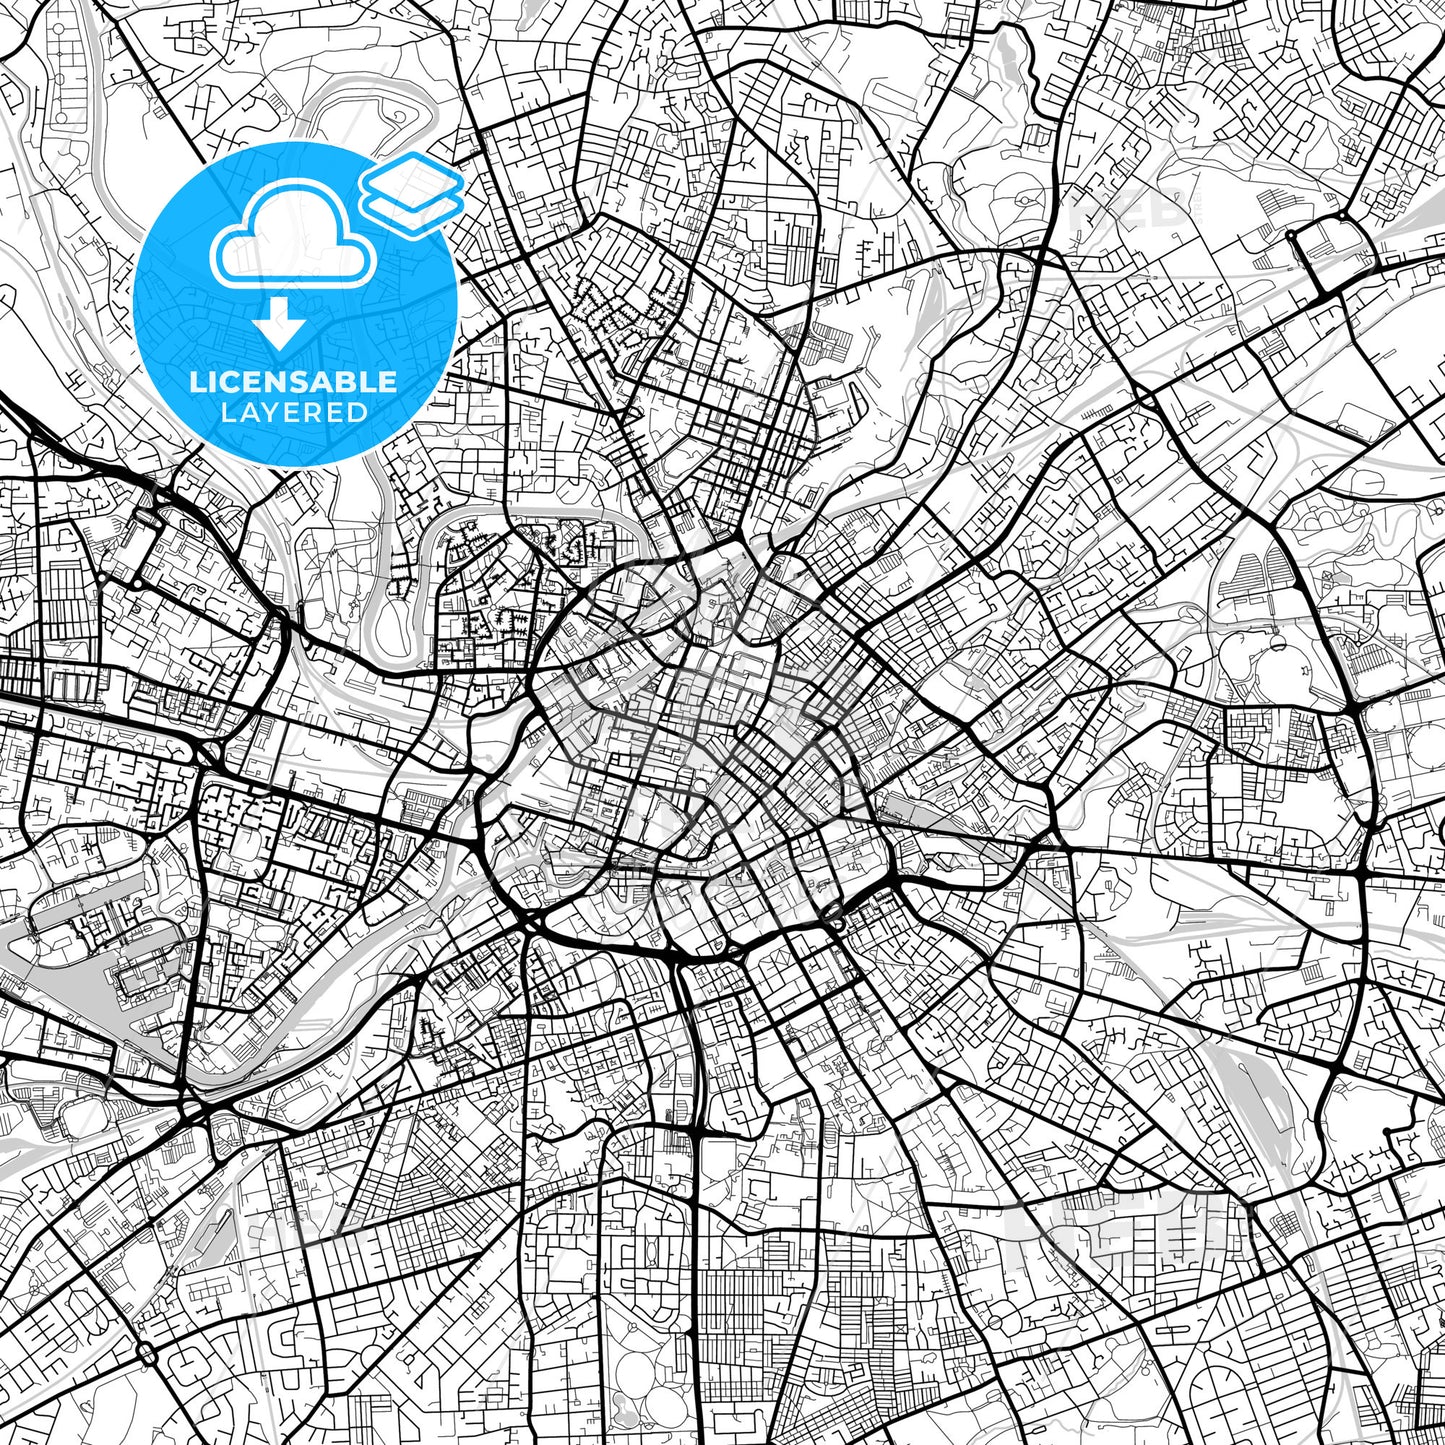 Layered PDF map of Manchester, North West England, England